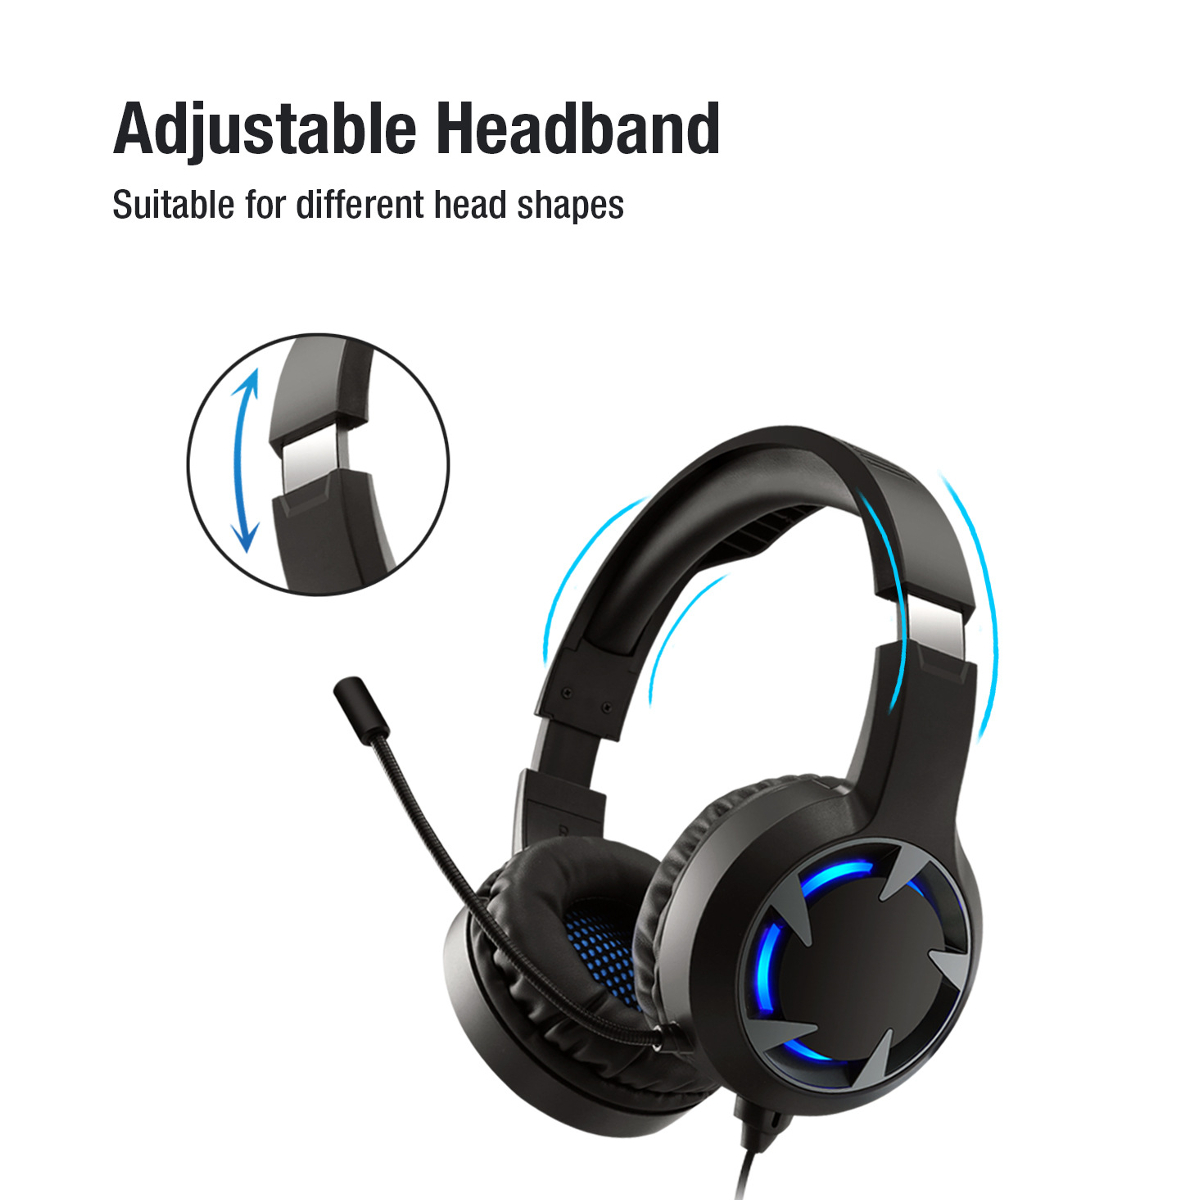 Bakeey-Wired-Headphones-Stereo-Bass-Surround-Gaming-Headset-for-PS4-New-for-Xbox-One-PC-with-Mic-1866137-12